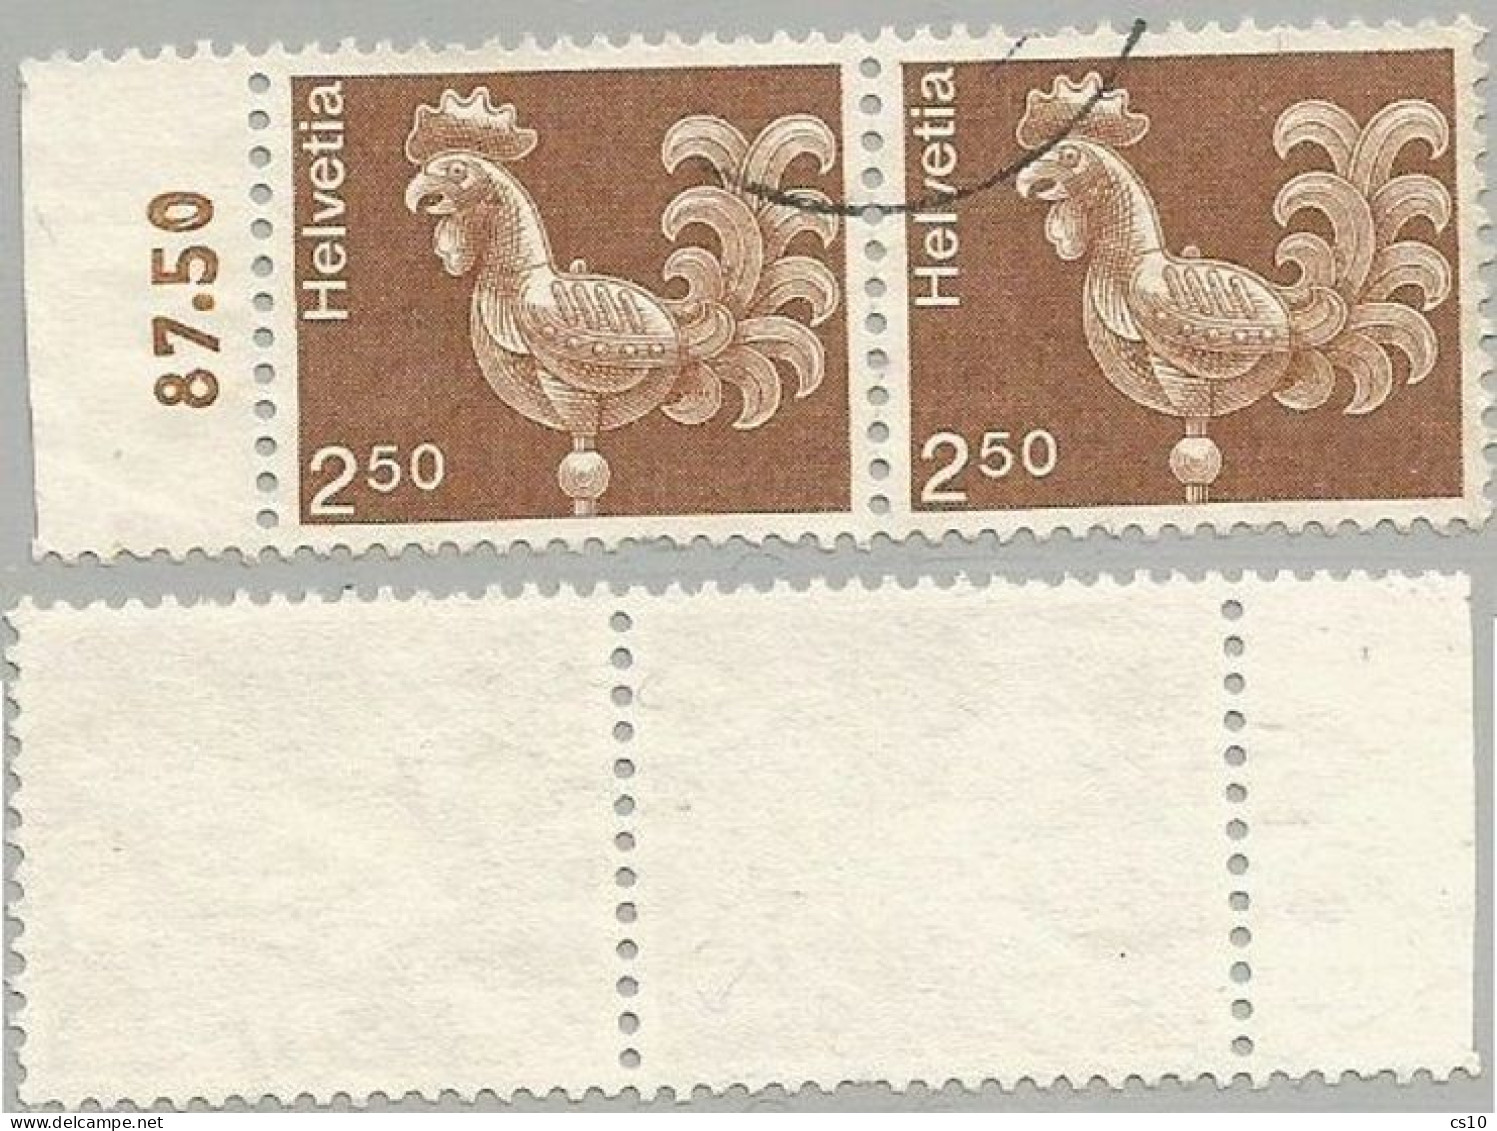 Suisse 1975 Artworks Wheatercock FS.2,50 - Scarce Variety NON FLUO PAPER - #2 Pcs In Horiz. Pair With Sheet Margin - Usados